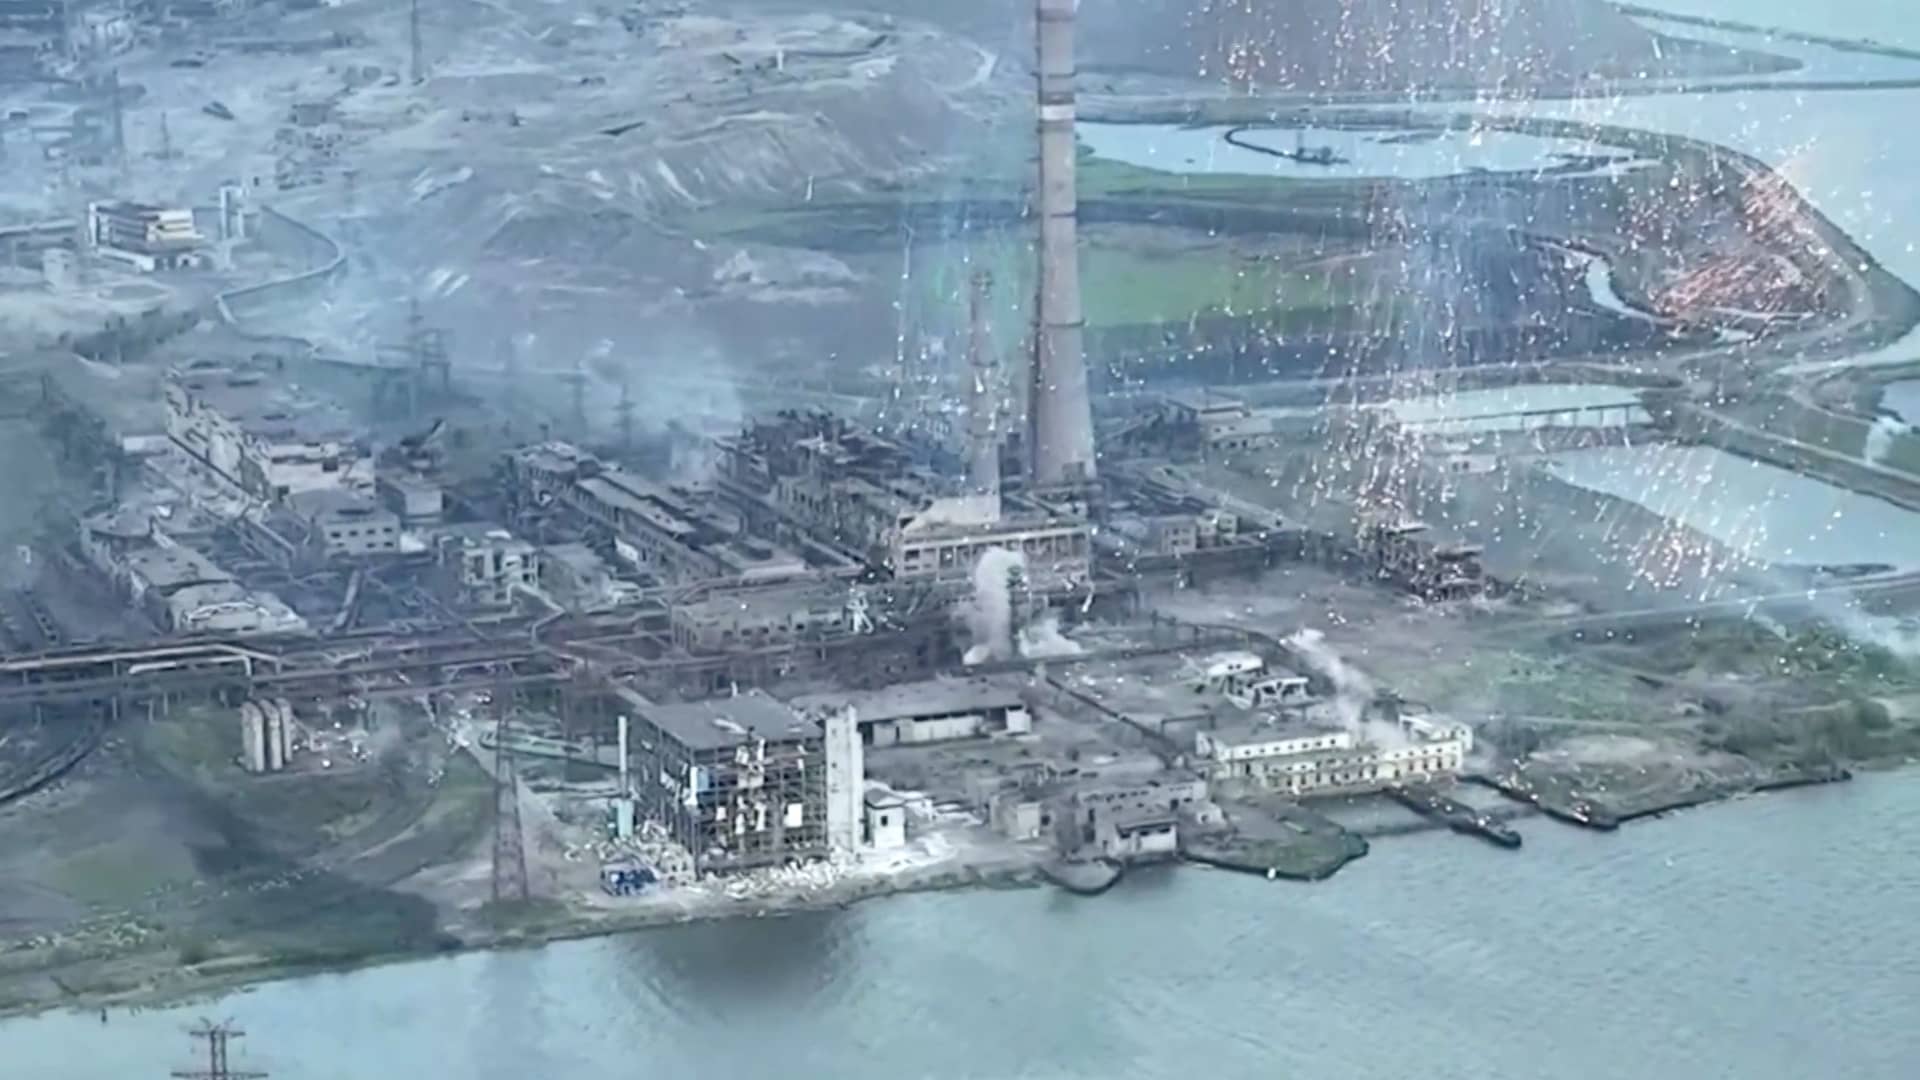 A screengrab from a video shows a shower of burning munitions hitting Azovstal steelworks in the Ukrainian port city of Mariupol, Ukraine. The video was obtained by Reuters on May 15, 2022.